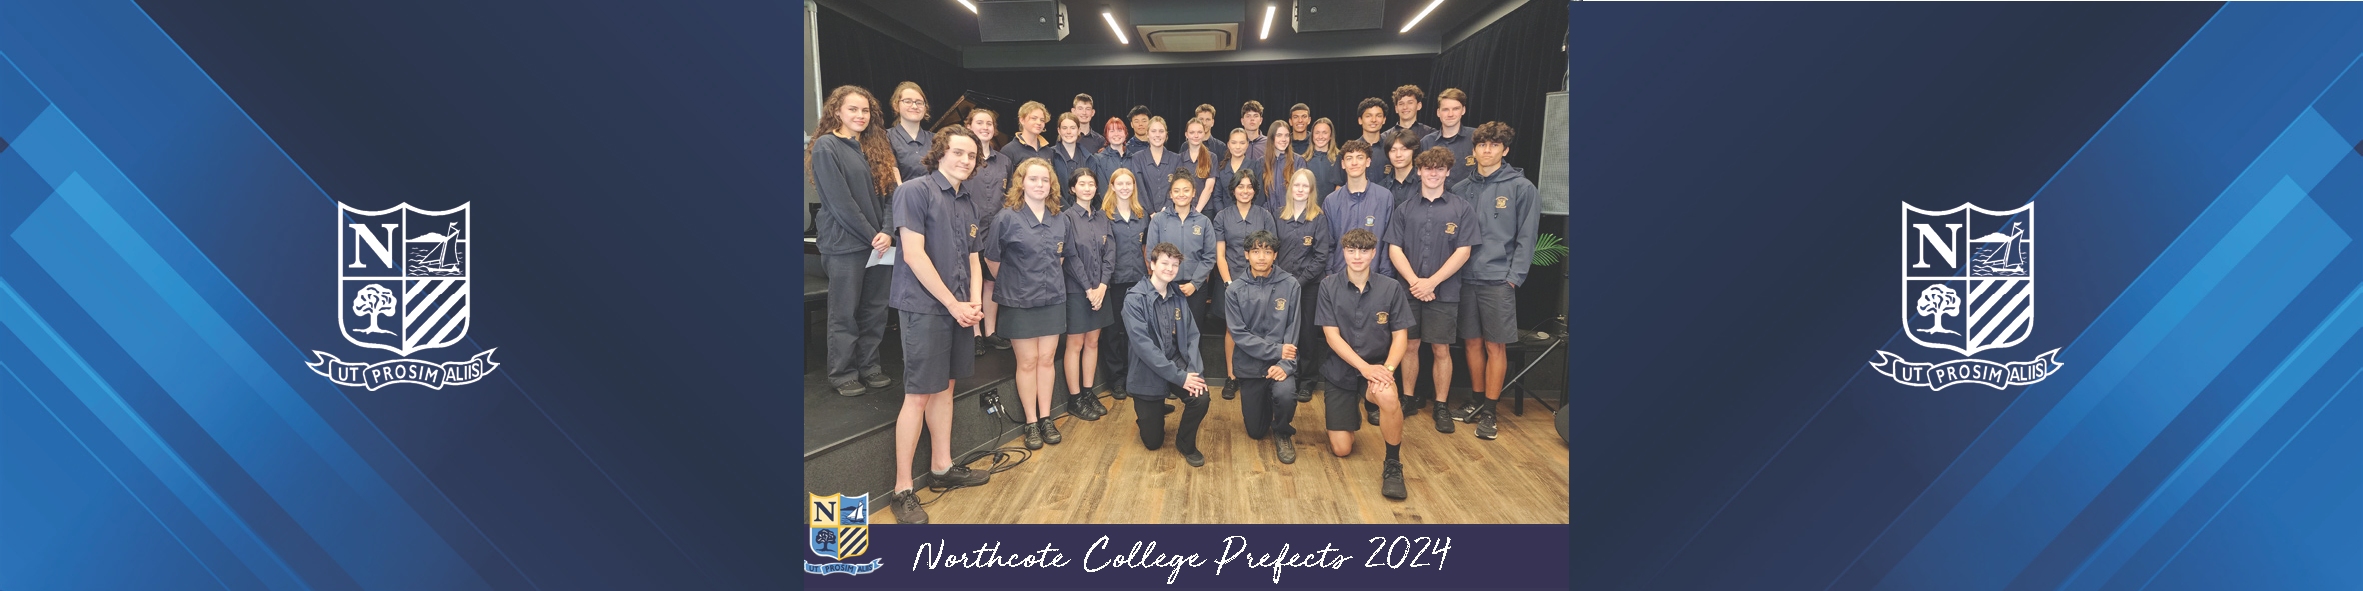 2024 northcote college prefects